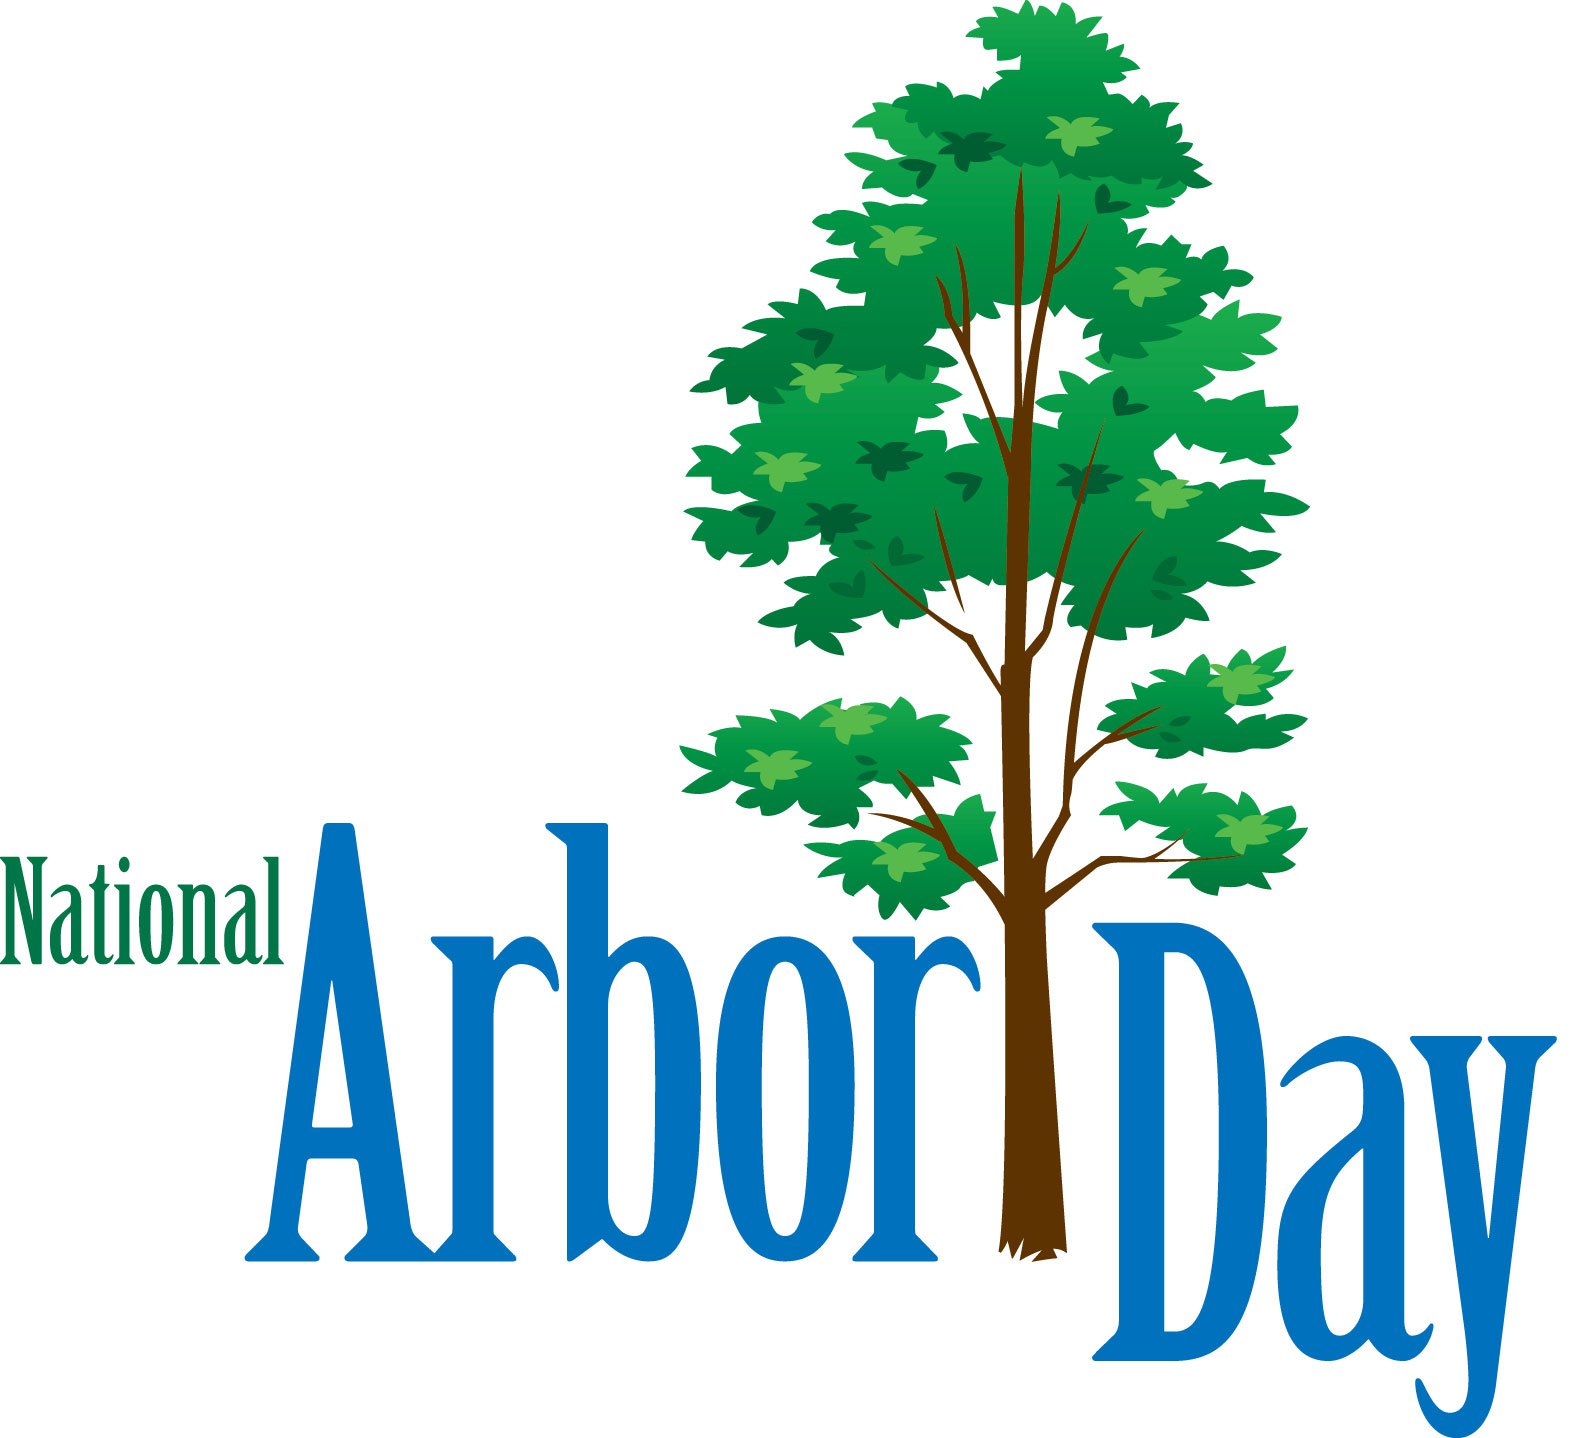 National Arbor Day free image download